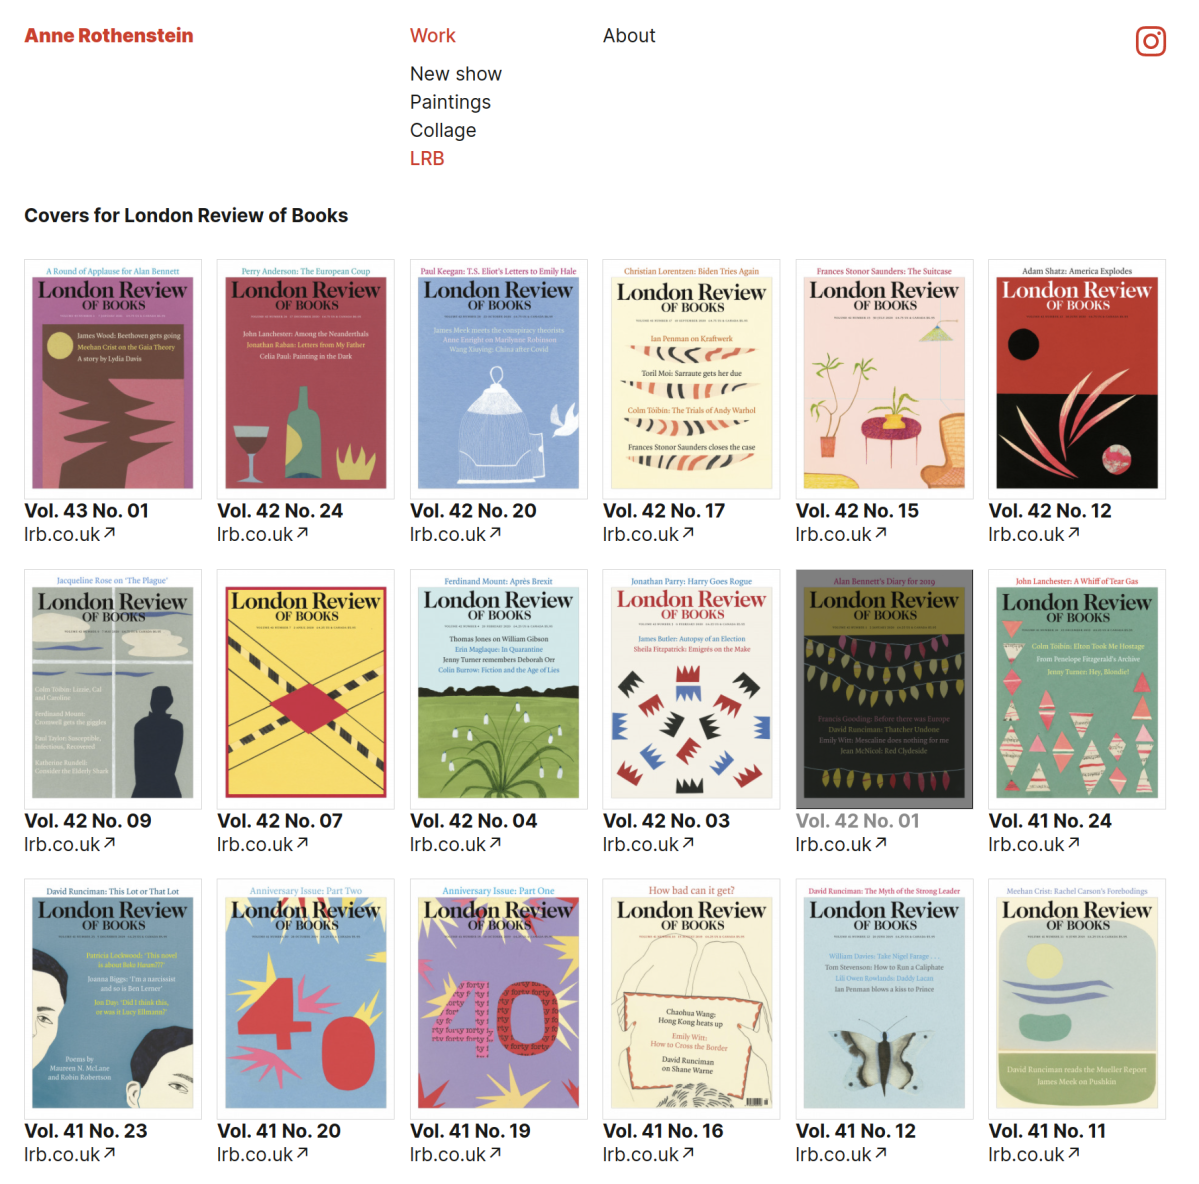 visual index of covers for The London Review of Books.